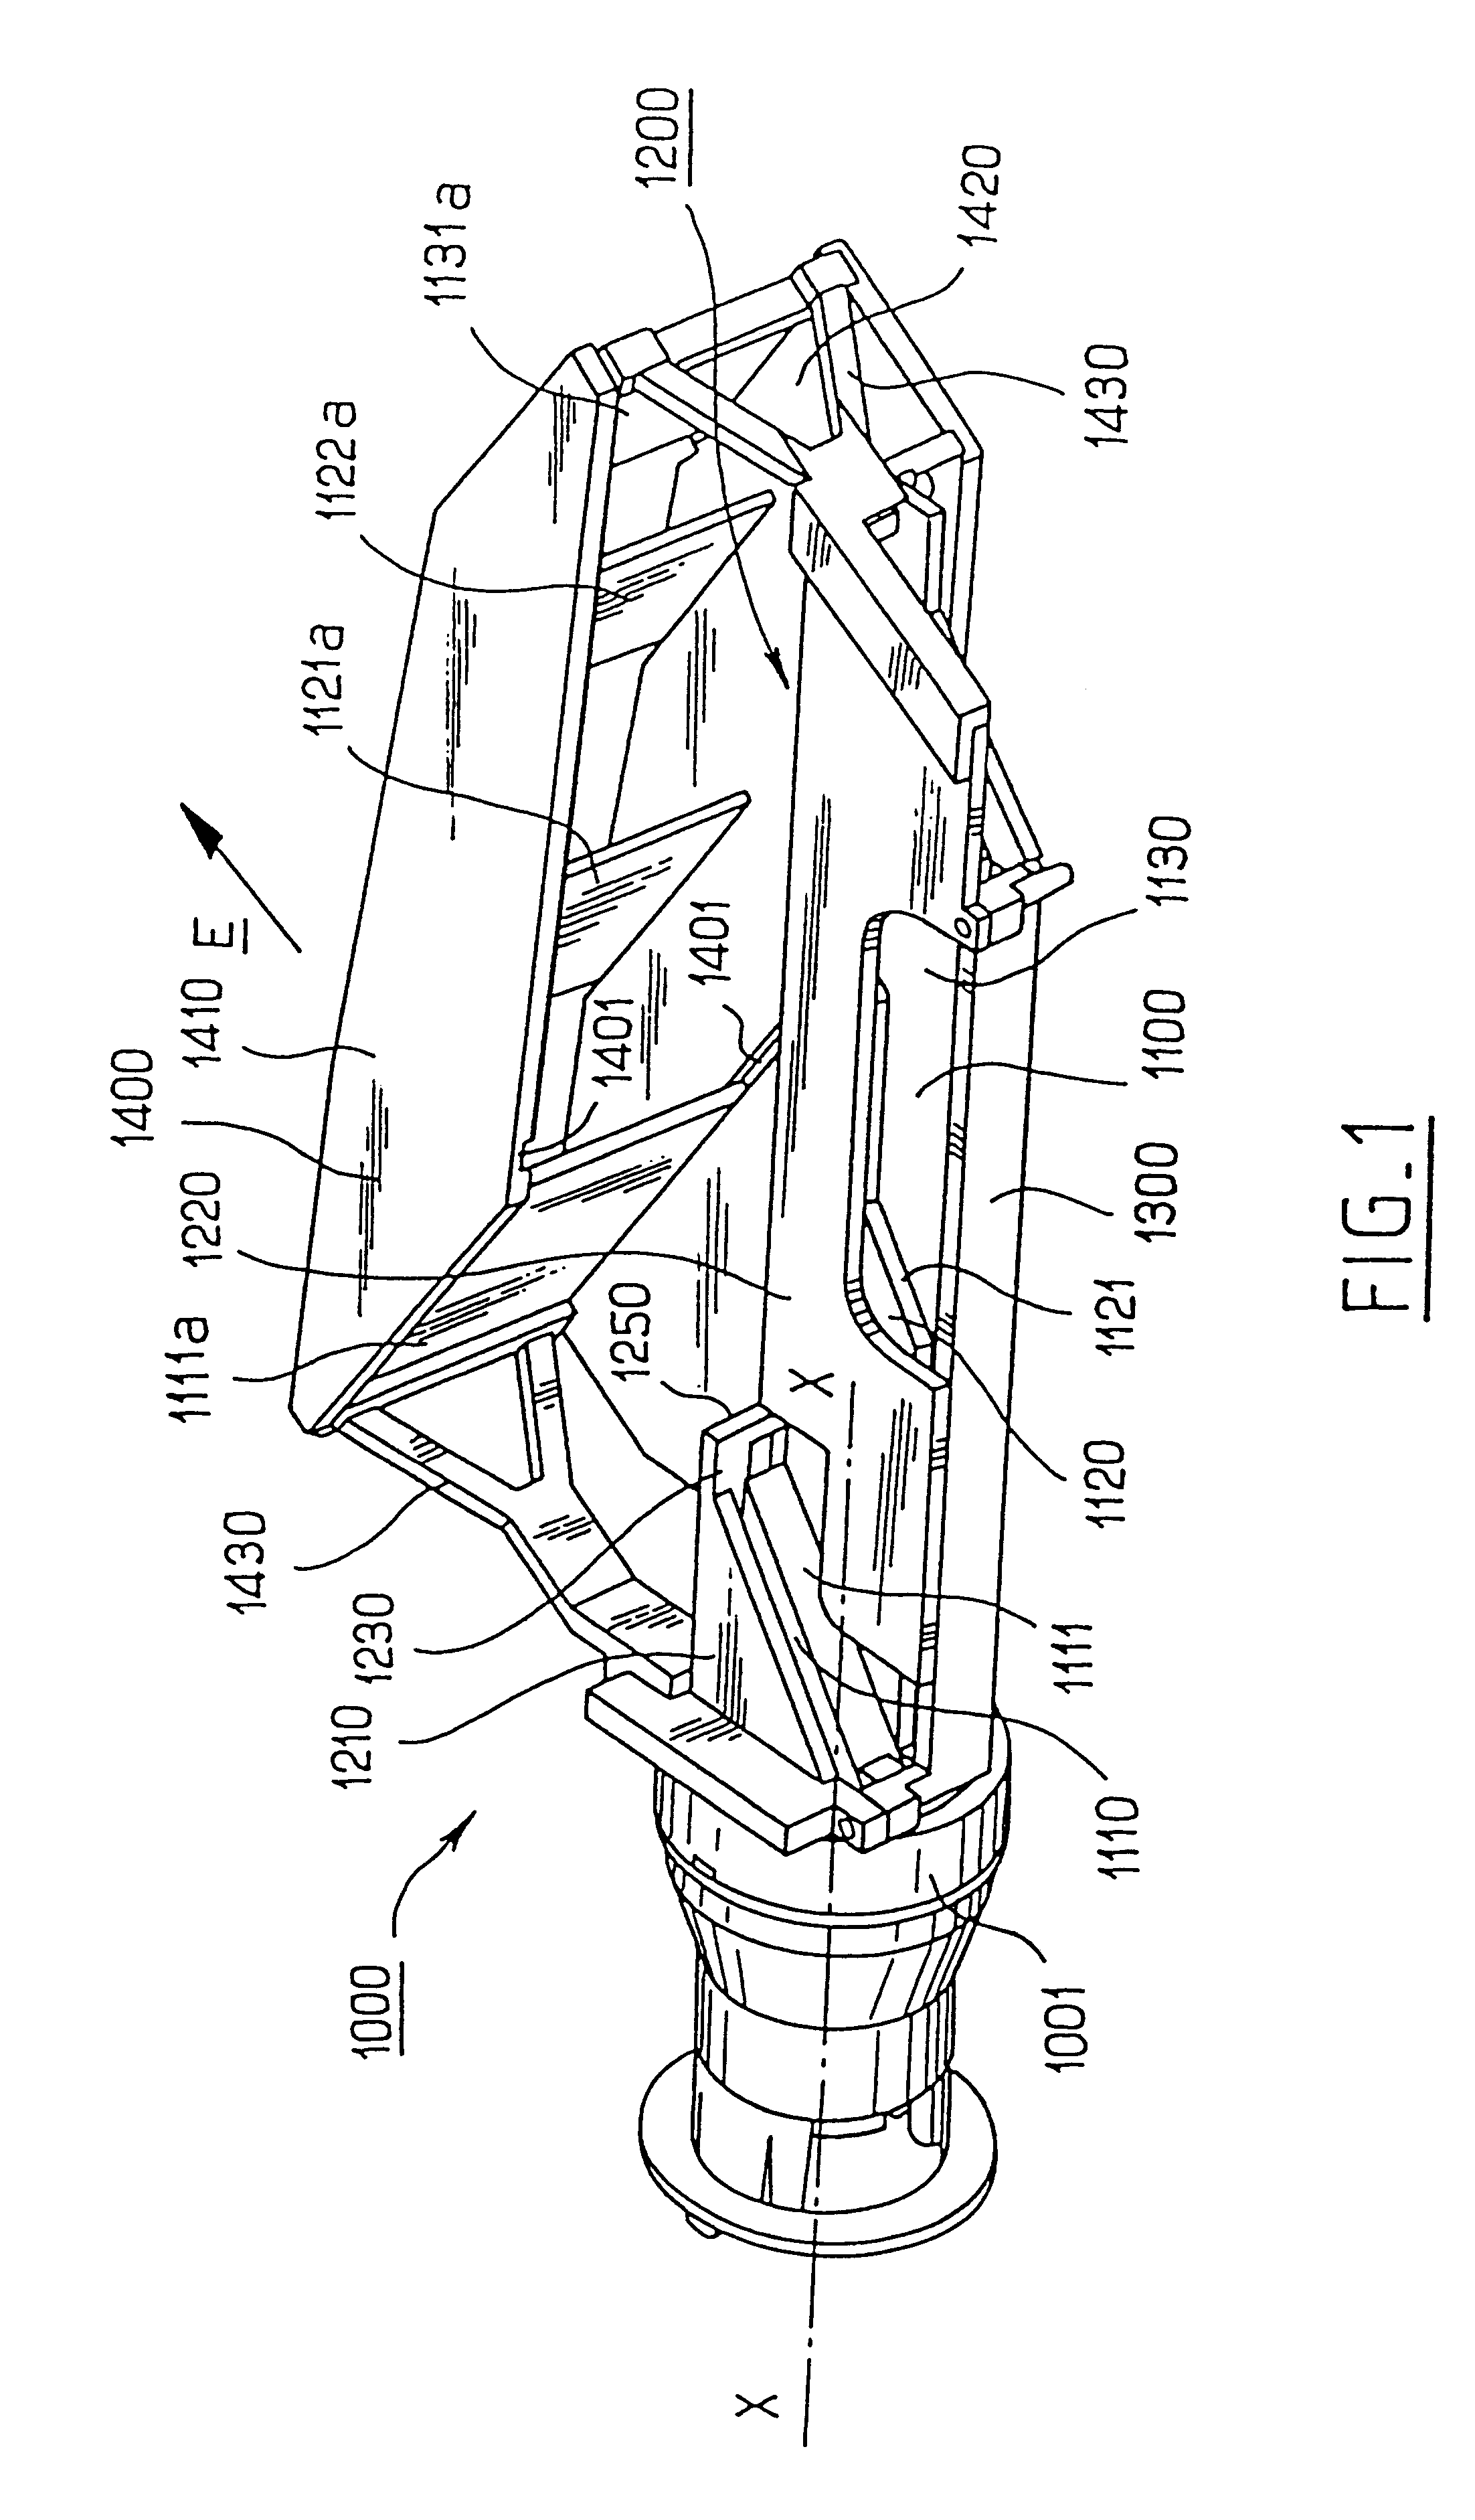 Lighting module with a light guide for a motor vehicle